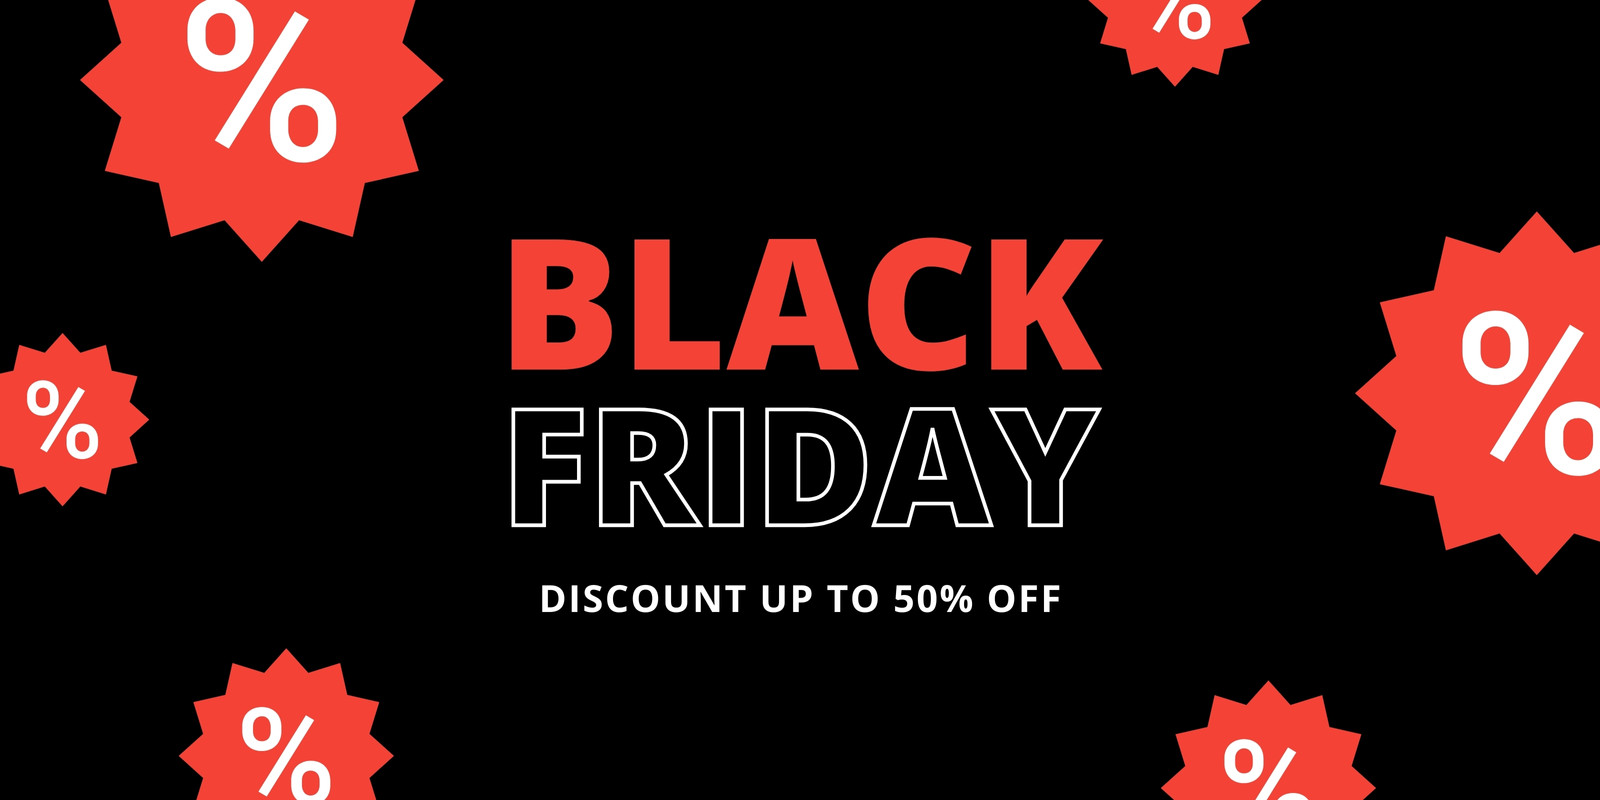 Page 4 - Free custom printable Black Friday banner templates | Canva